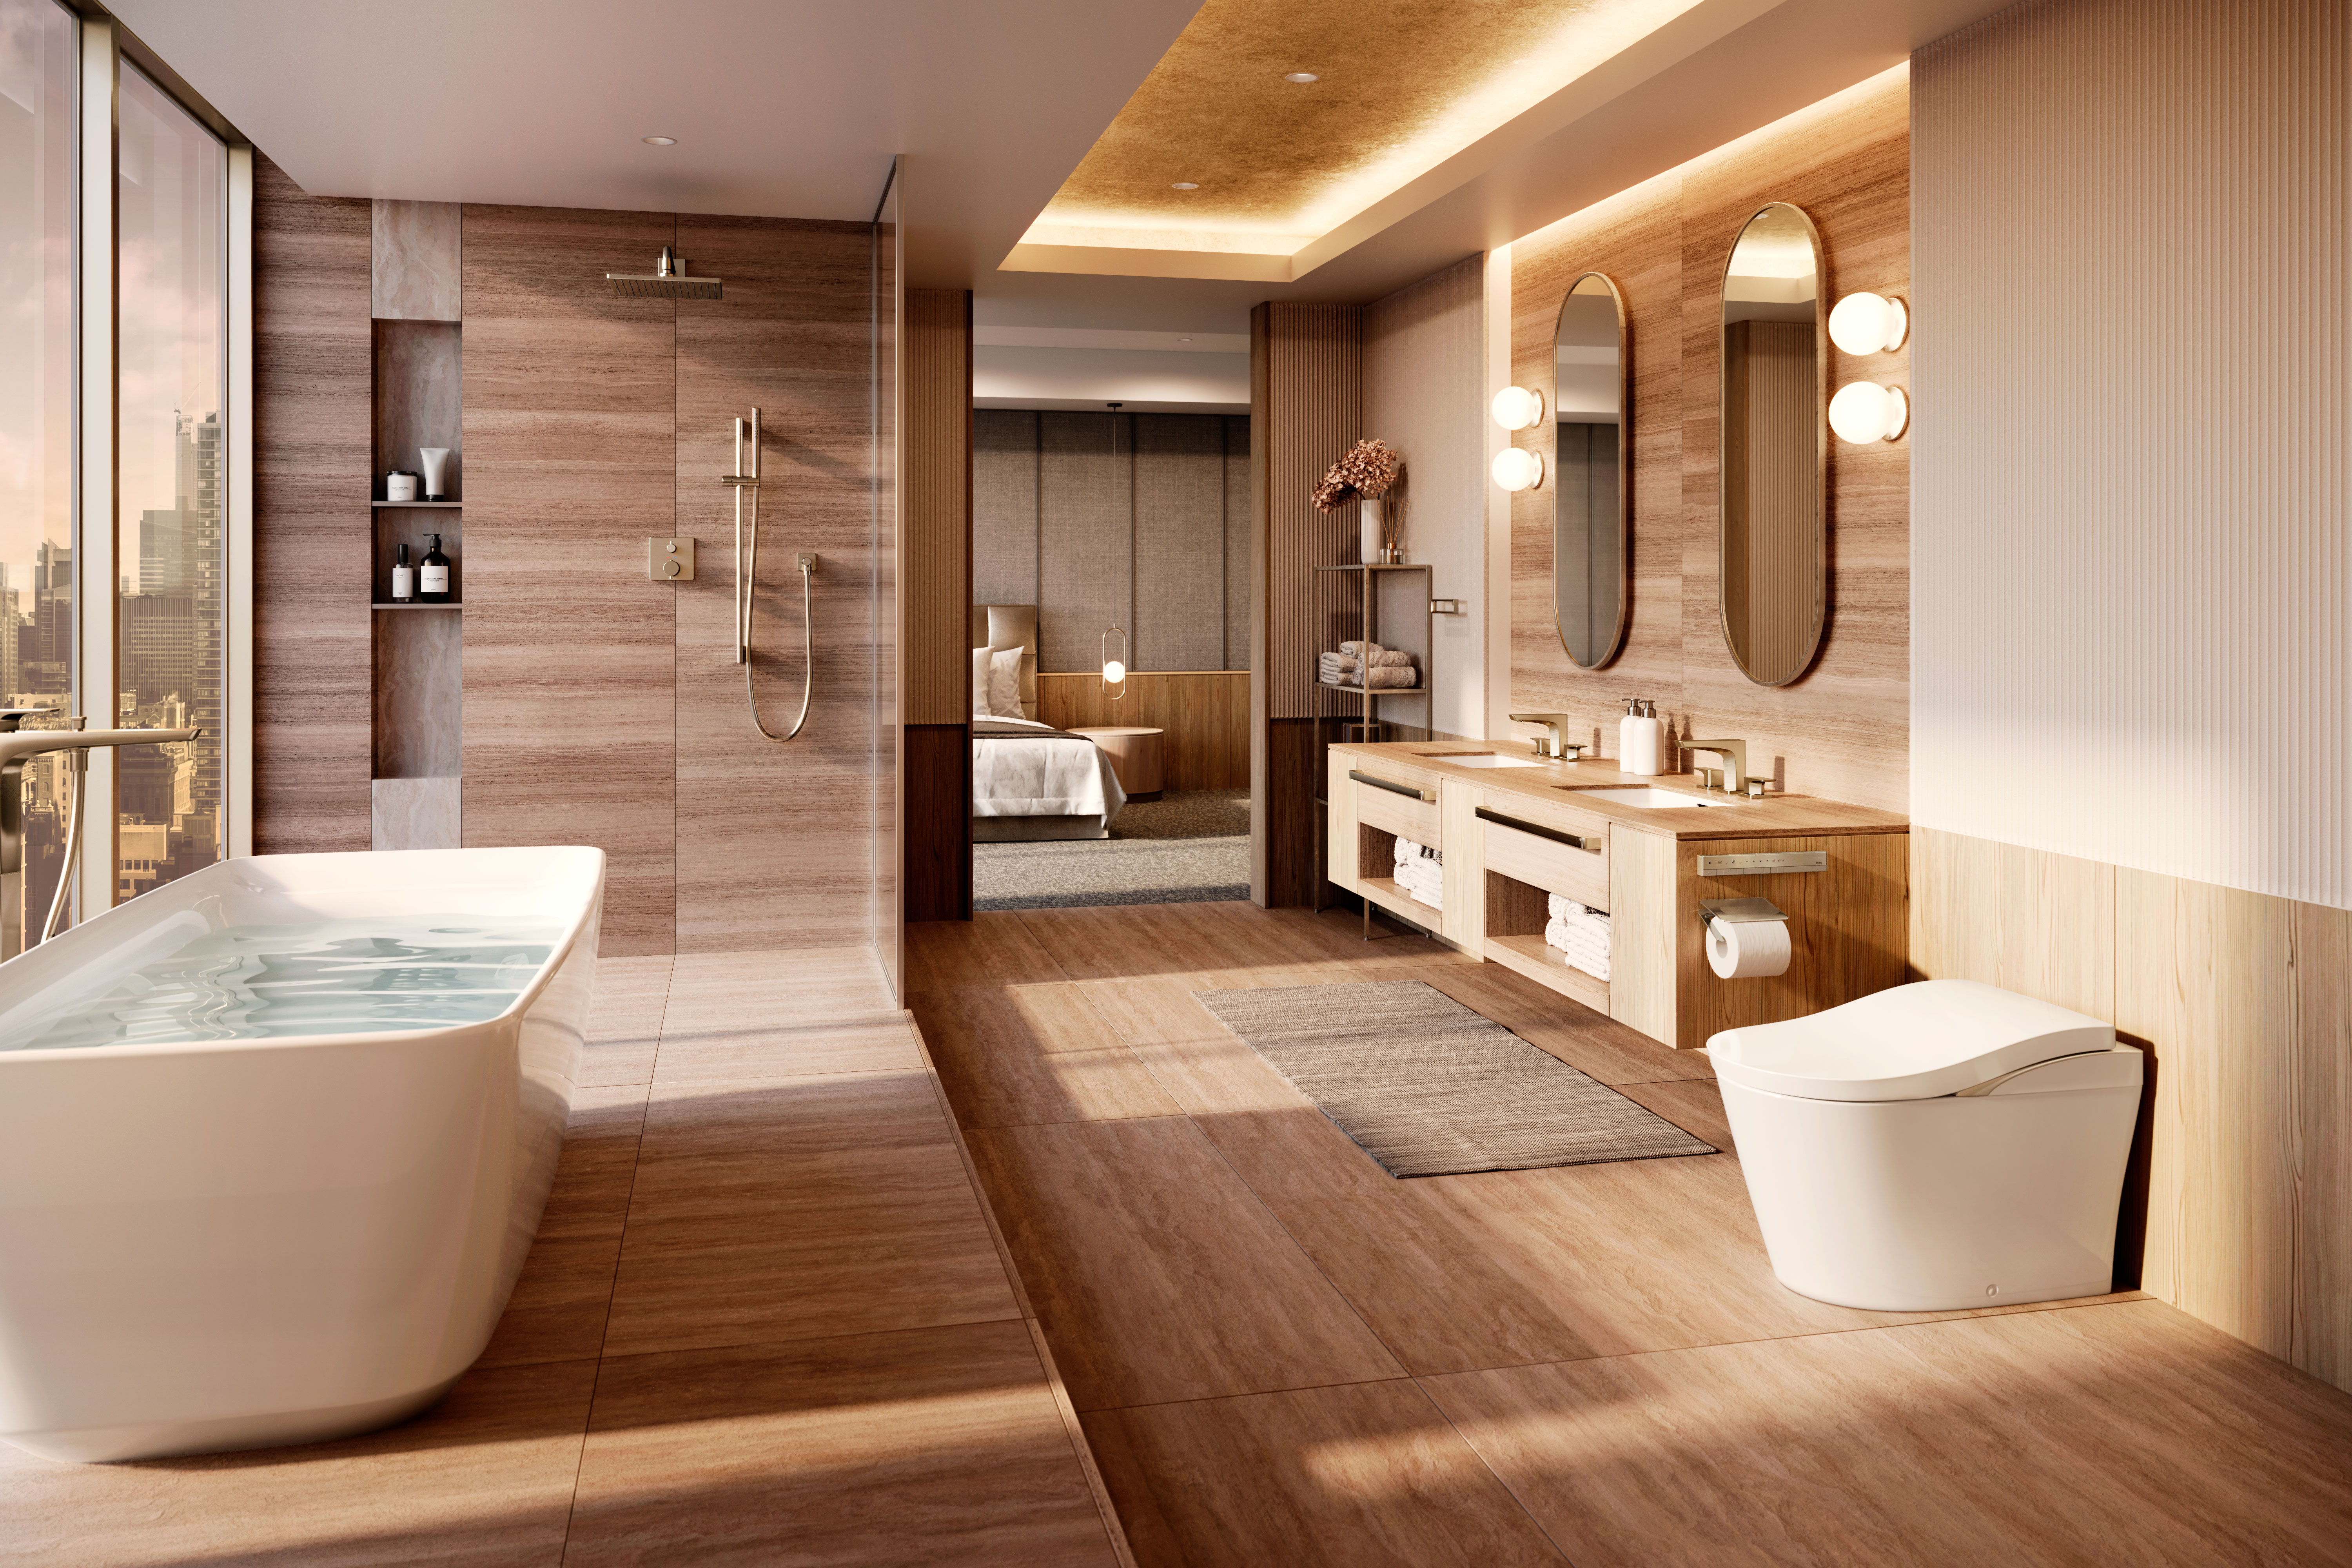 TOTO’s bathroom products enhance home value and offer an impressive ROI even in uncertain economic times.